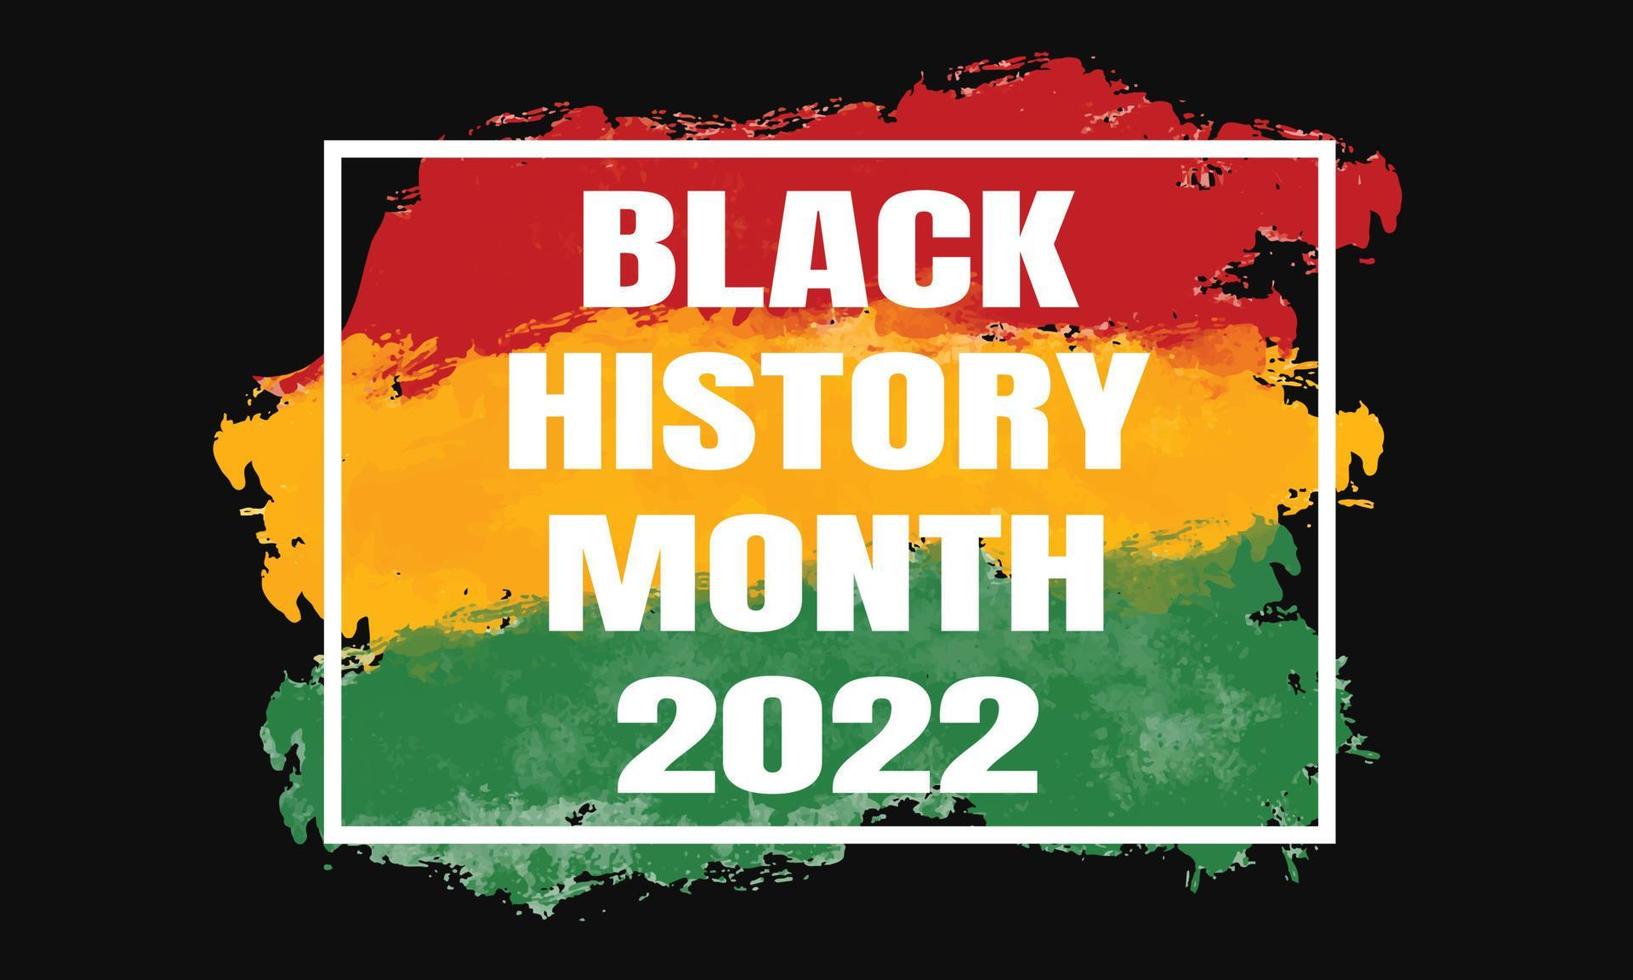 Black history month 2022 banner with African American grunge textured flag background. Vector design for USA ethnic heritage holiday celebration. Invitation, flyer design